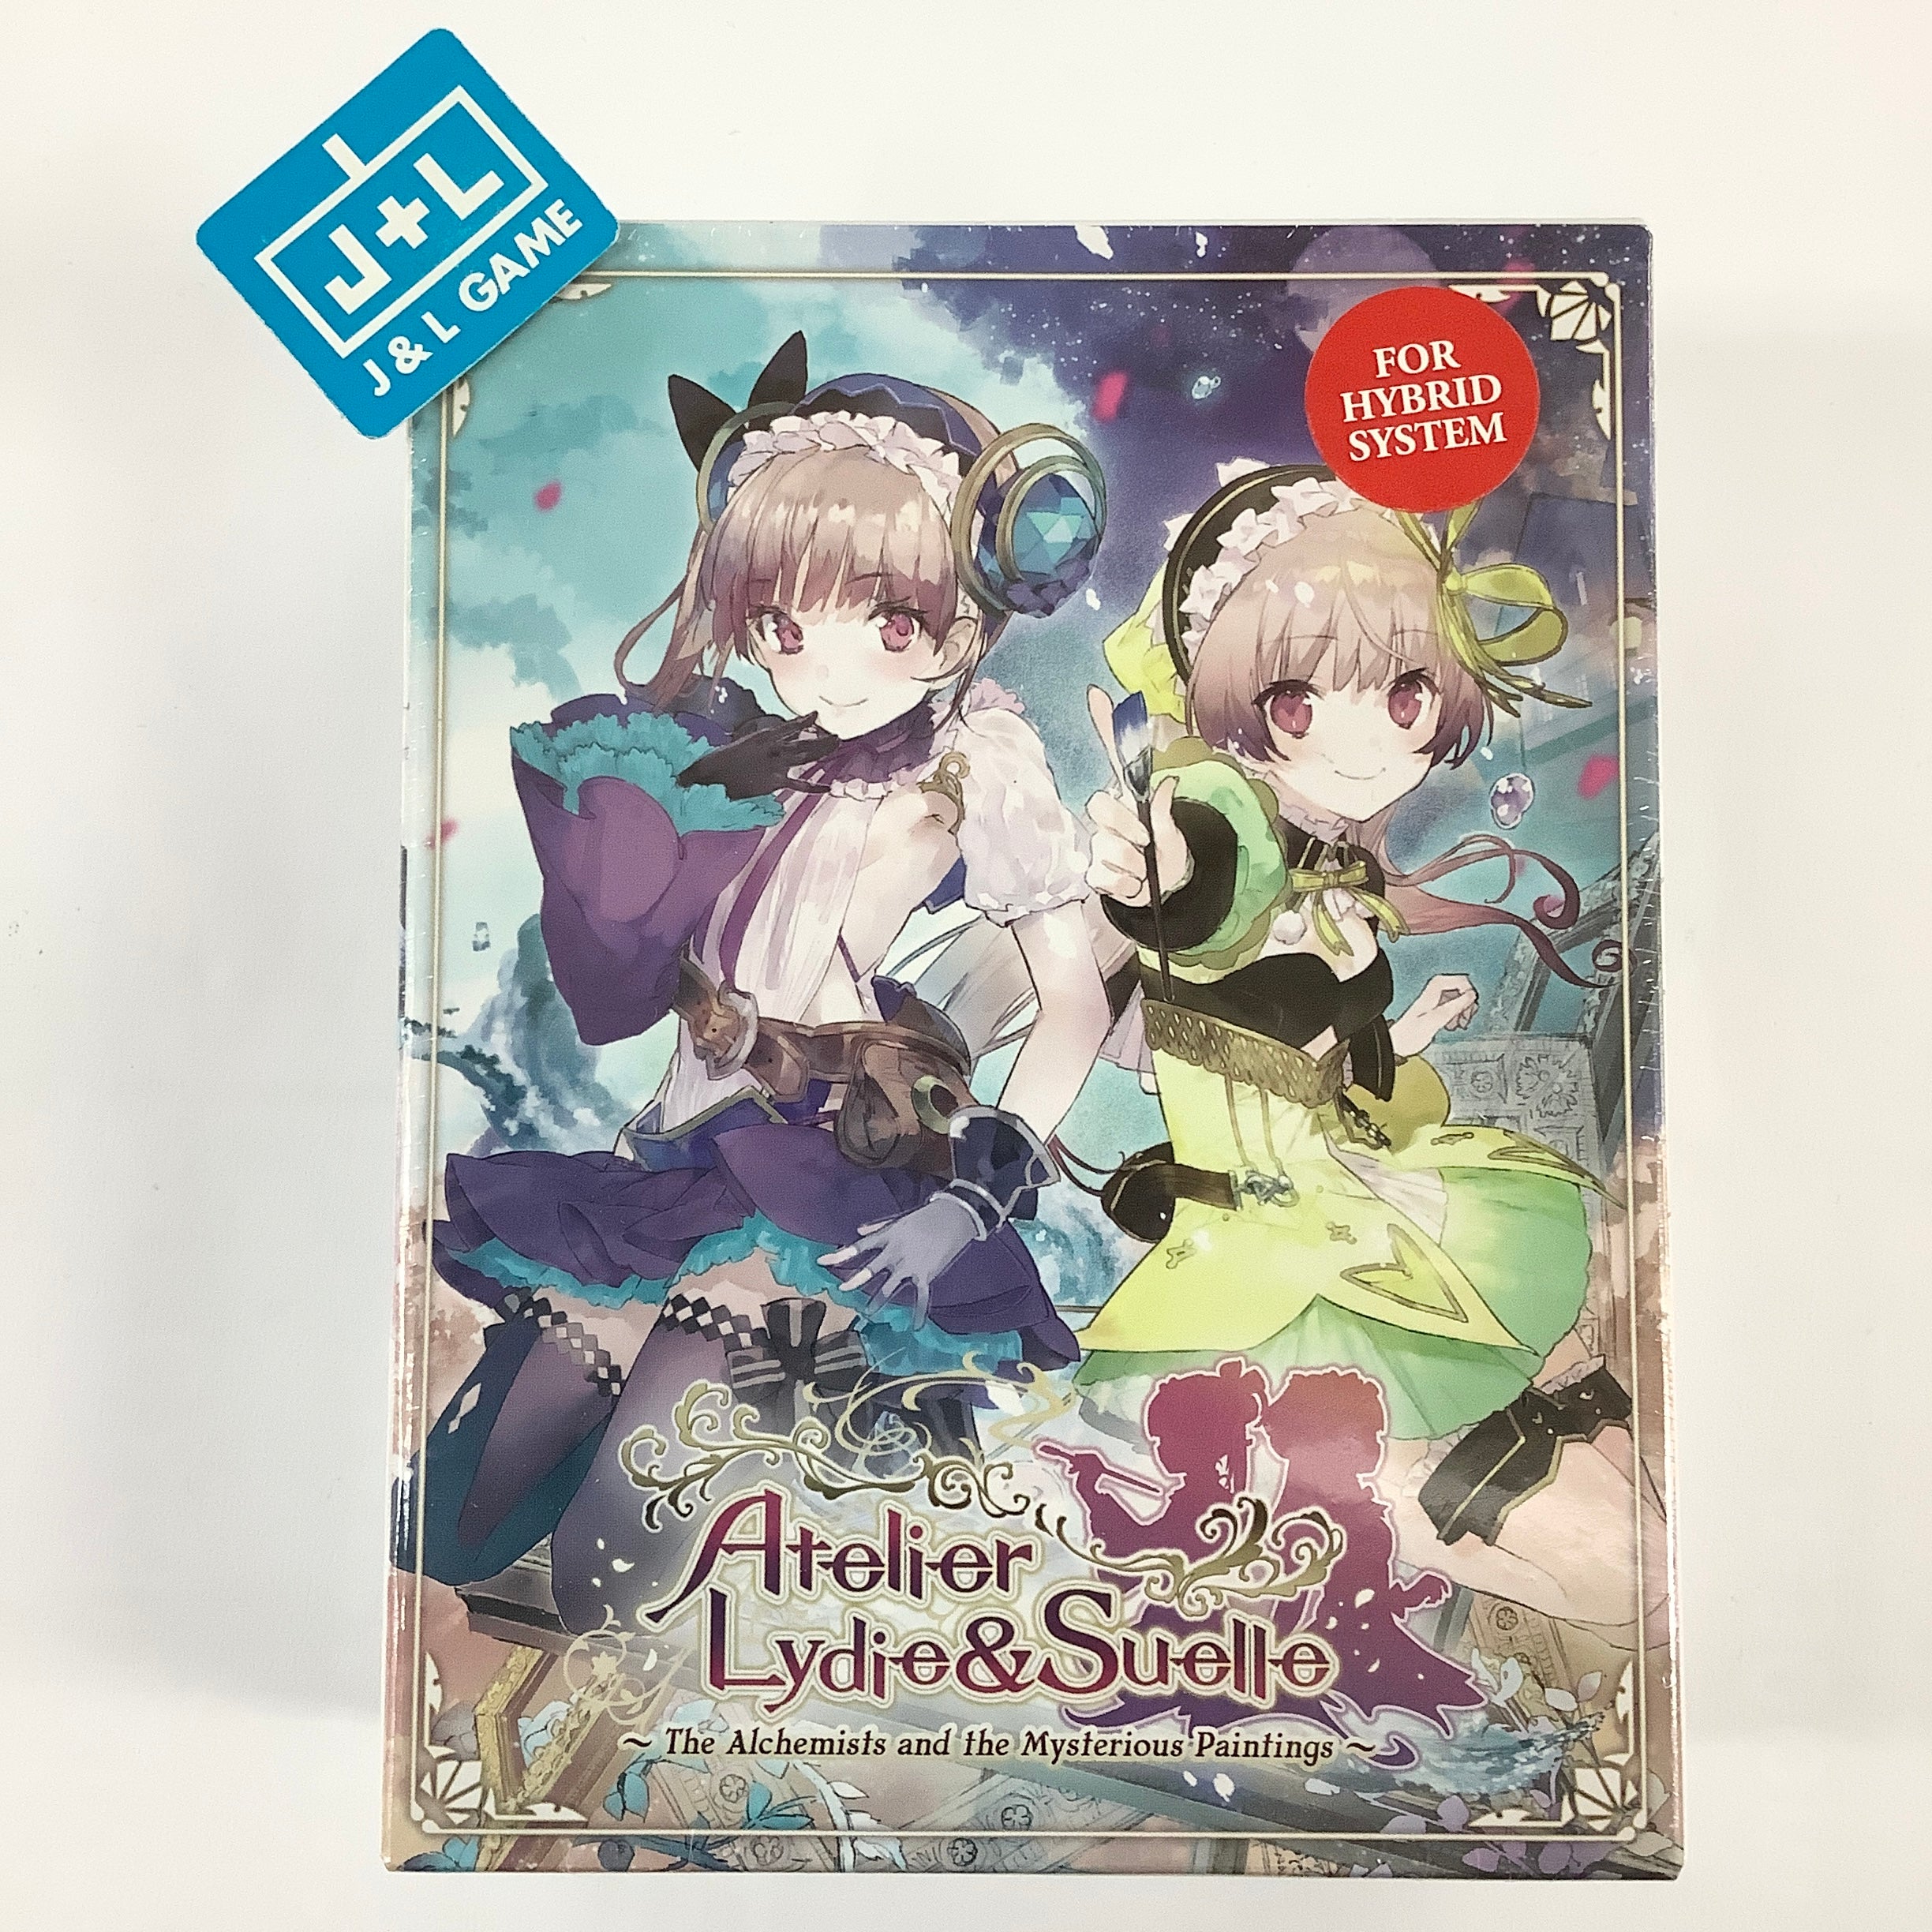 Atelier Lydie & Suelle: The Alchemists and the Mysterious Paintings (Limited Edition) - (NSW) Nintendo Switch Video Games Koei Tecmo Games   